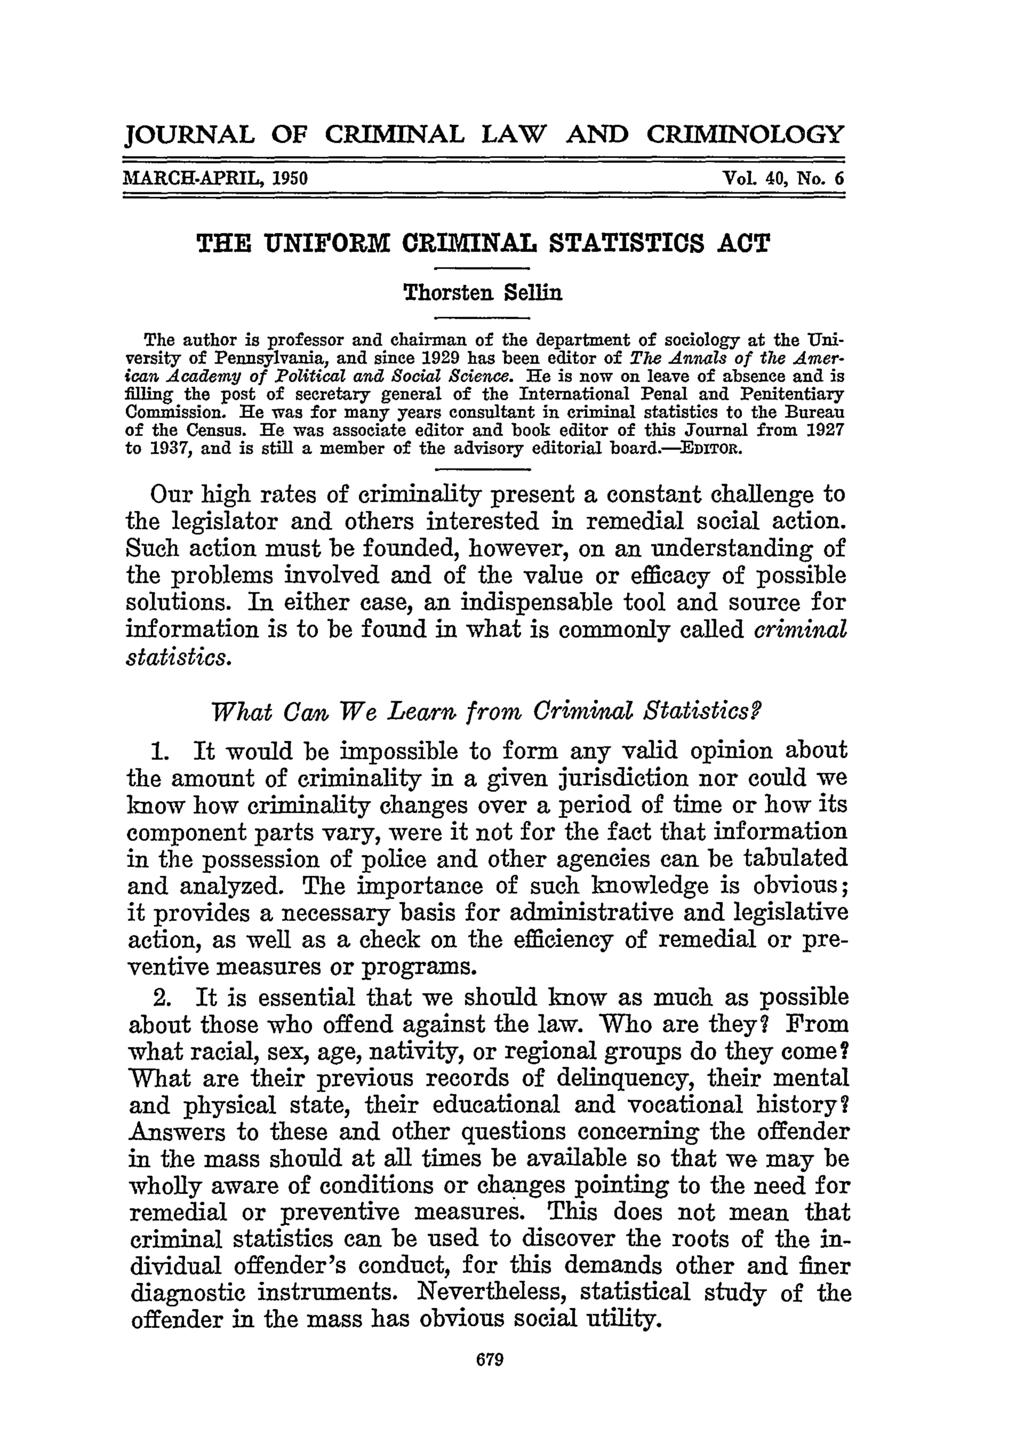 JOURNAL OF CRIMINAL LAW AND CRIMINOLOGY AIARCH-APRIL, 1950 VoL 40, No.